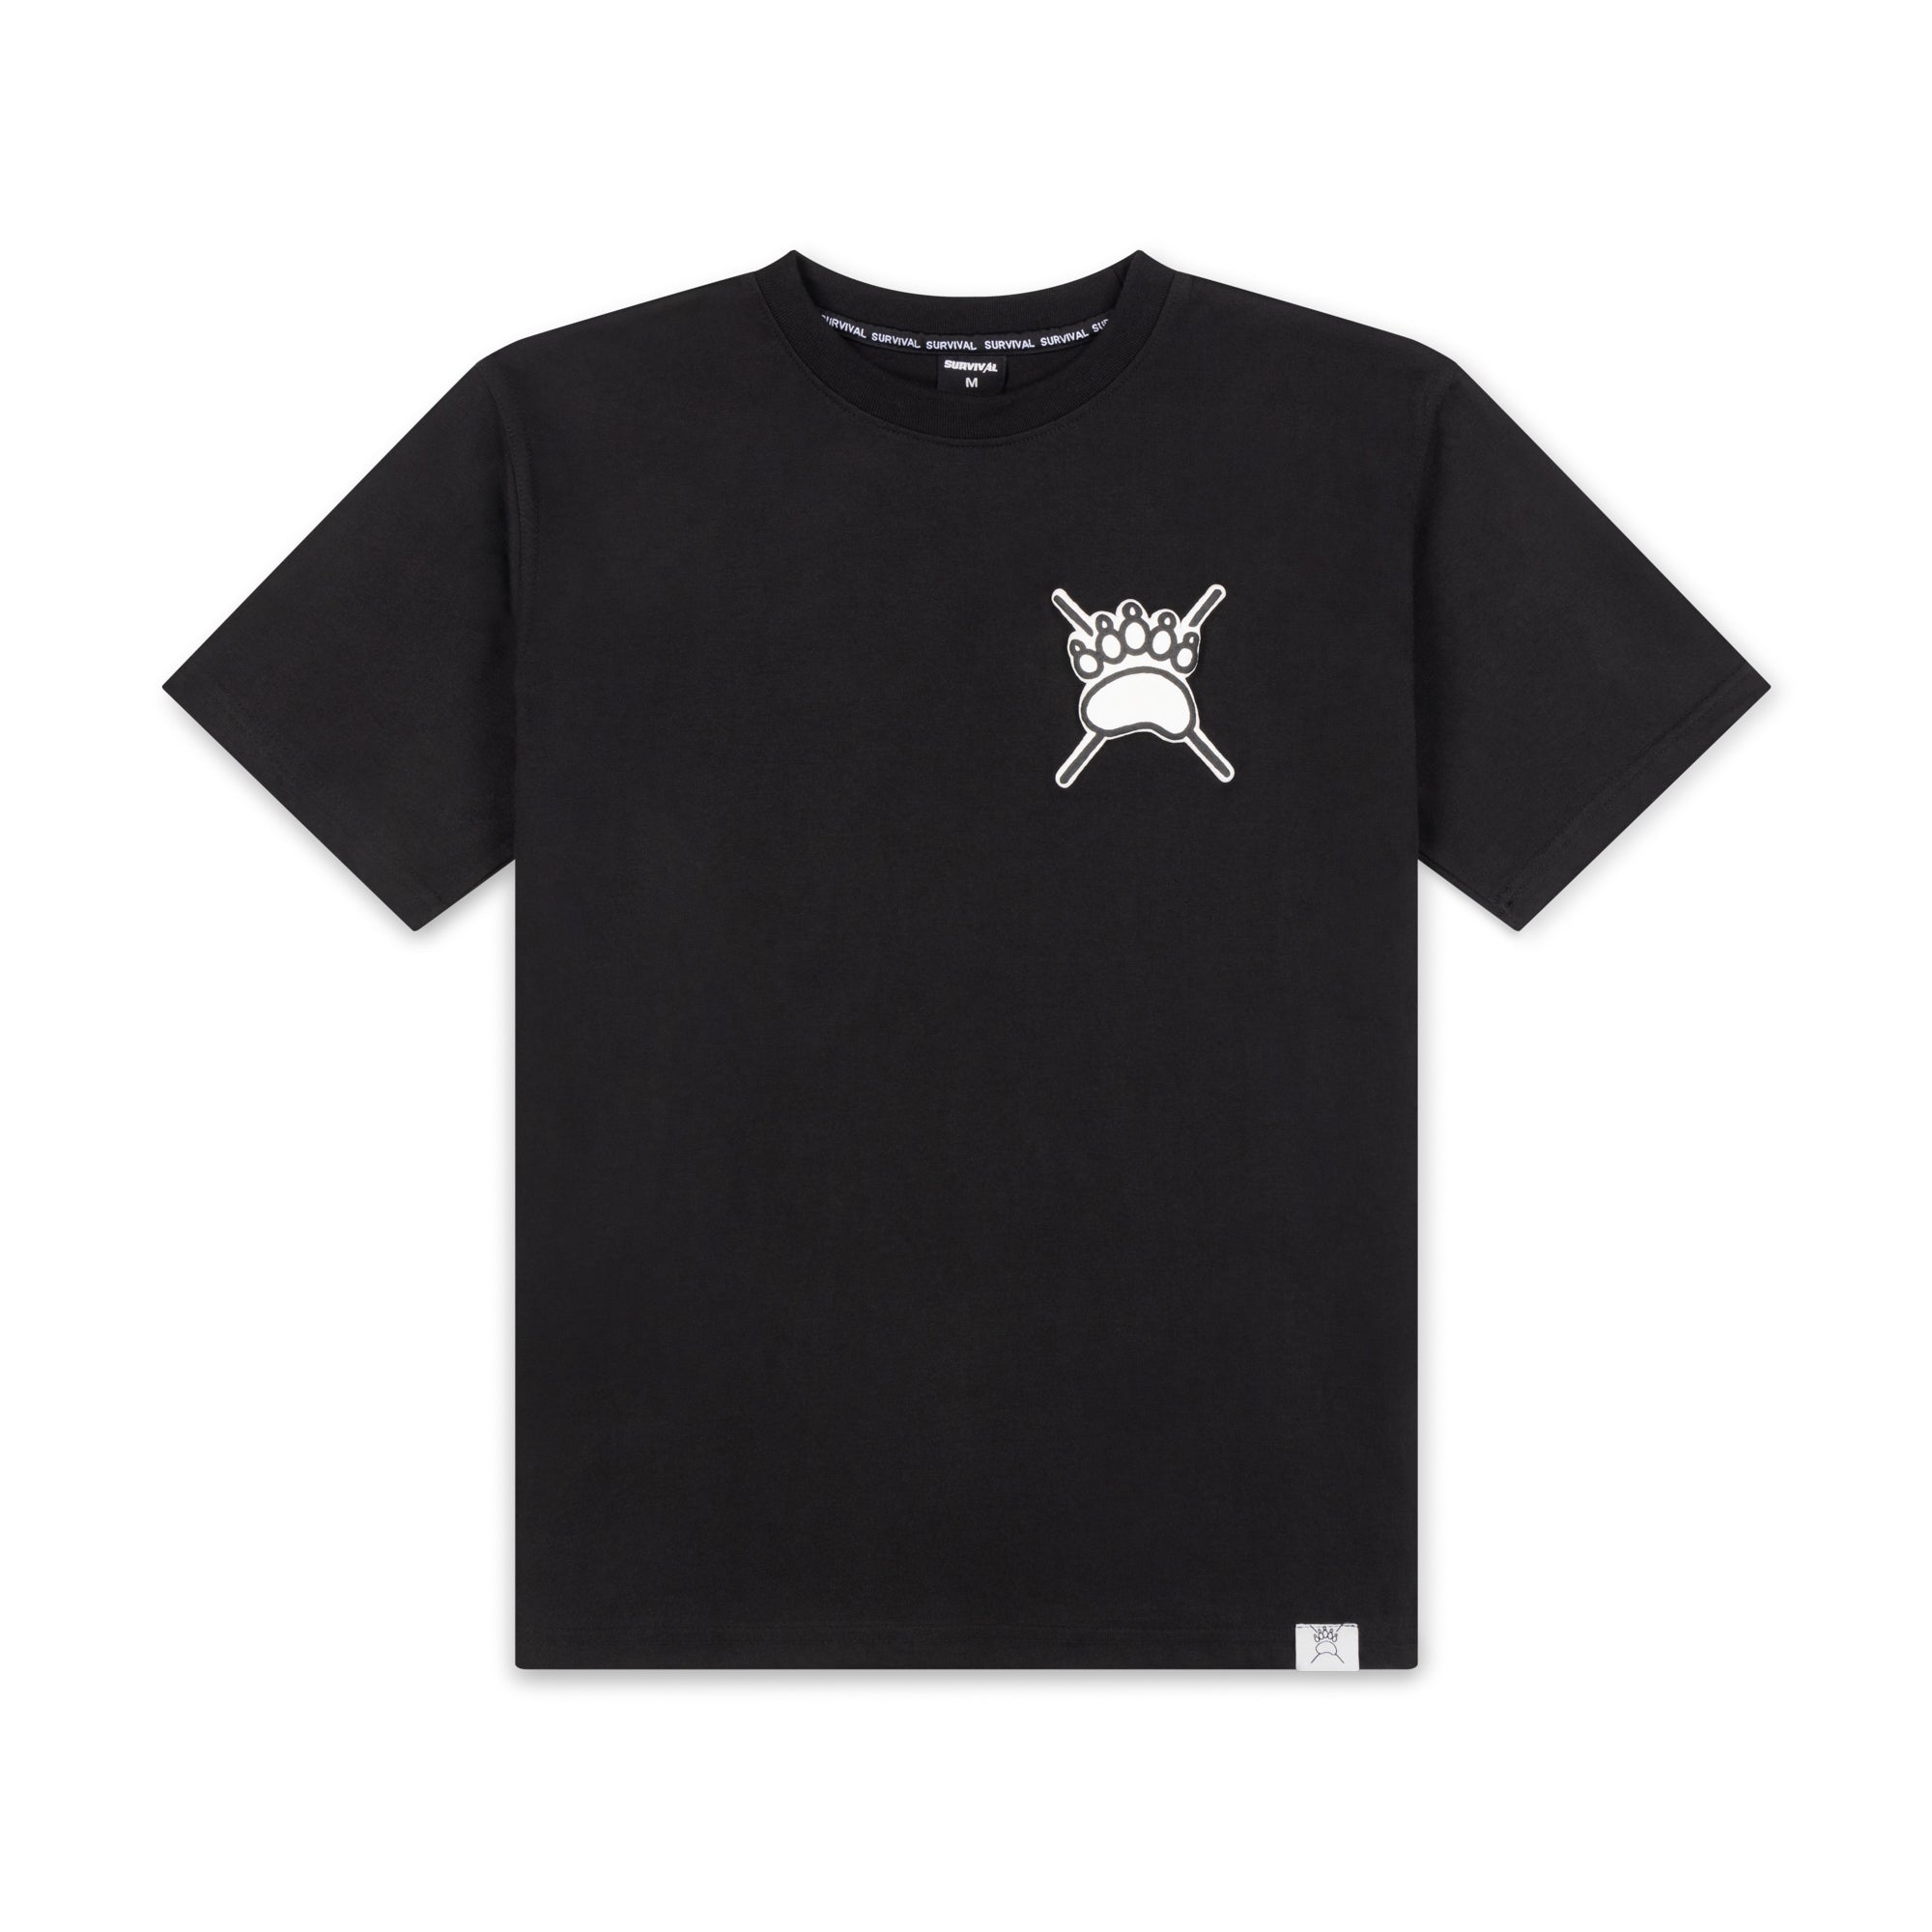 Bear Breed T-Shirt | Black Printed T-Shirt  | The Survival Couture